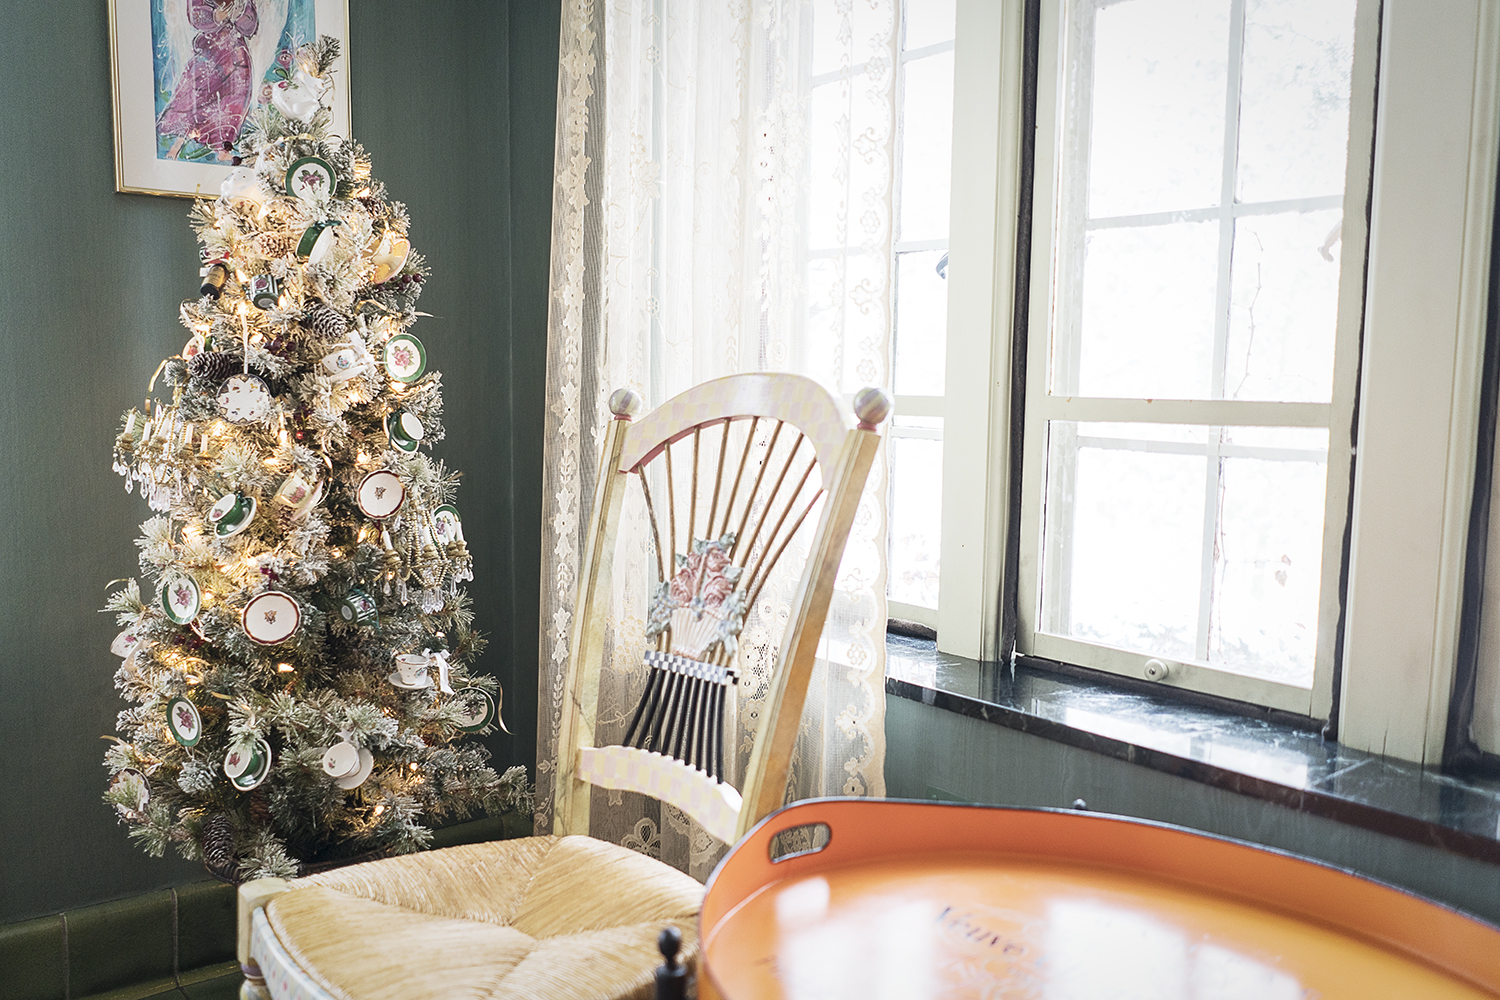 A small Christmas tree decorated with miniature tea cups and saucers sits in the corner of a room in the Heddy home.